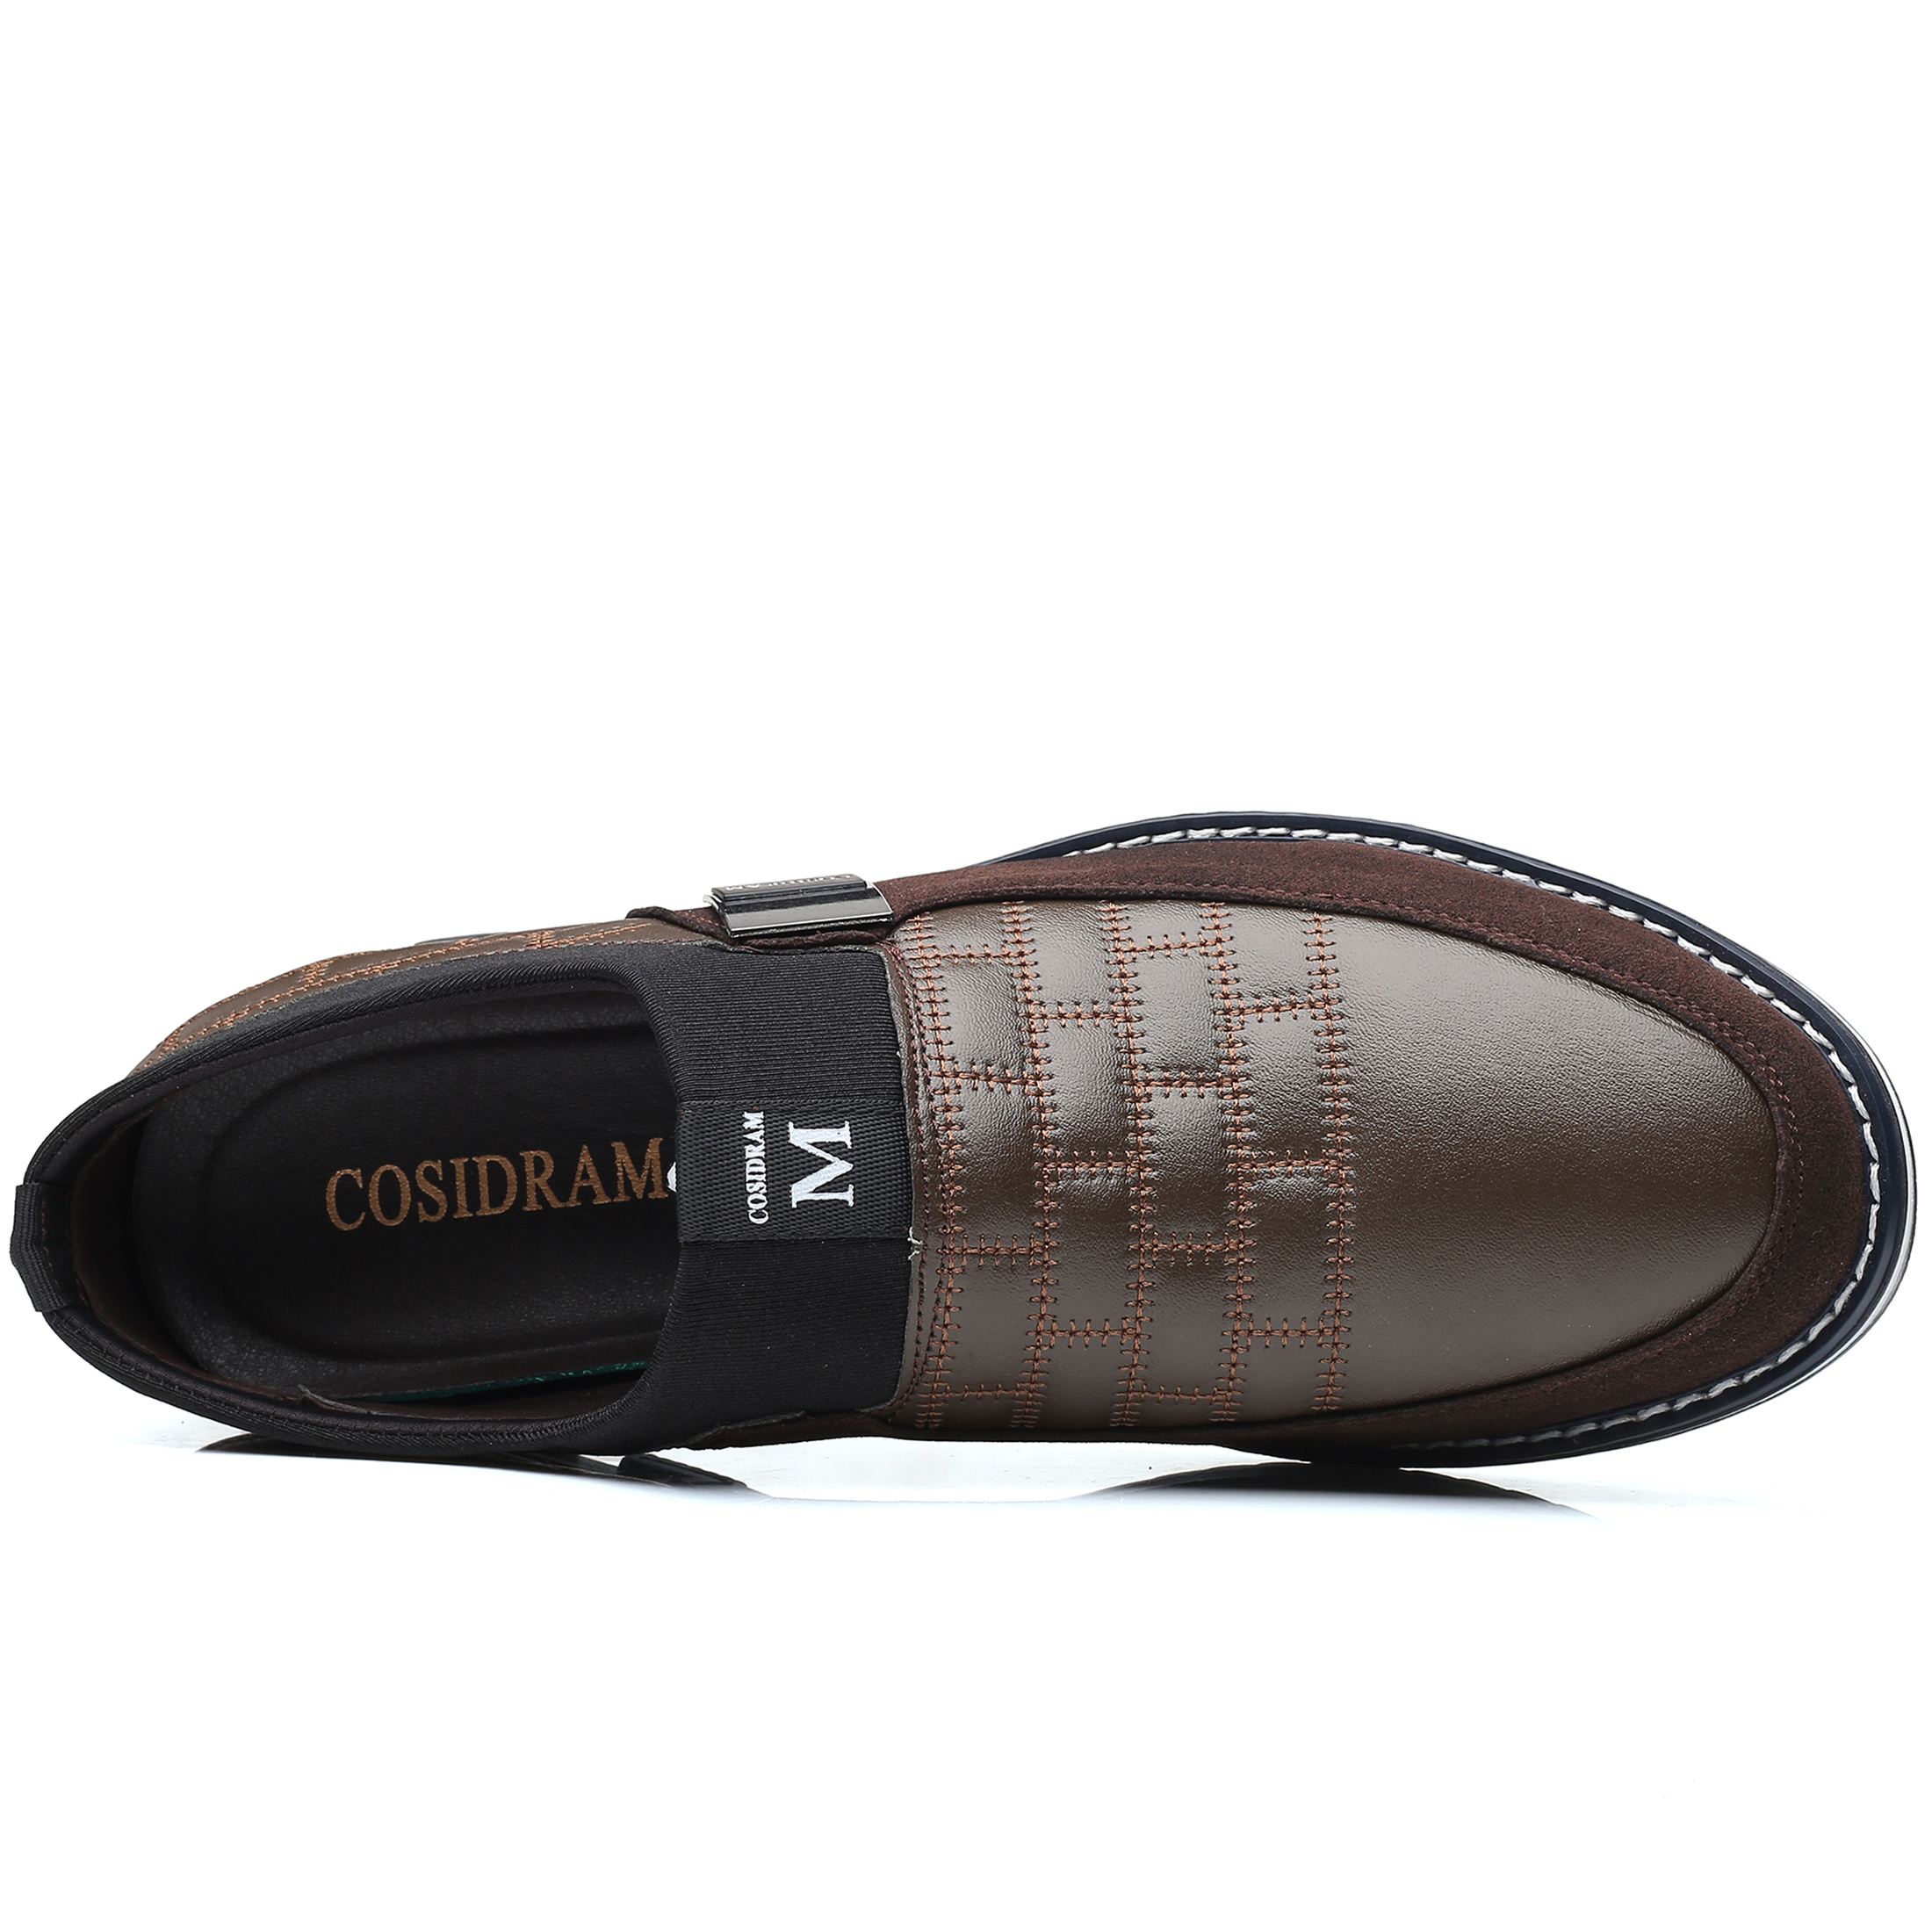 COSIDRAM Men Casual Shoes Breathable Comfort Loafers - image 3 of 6